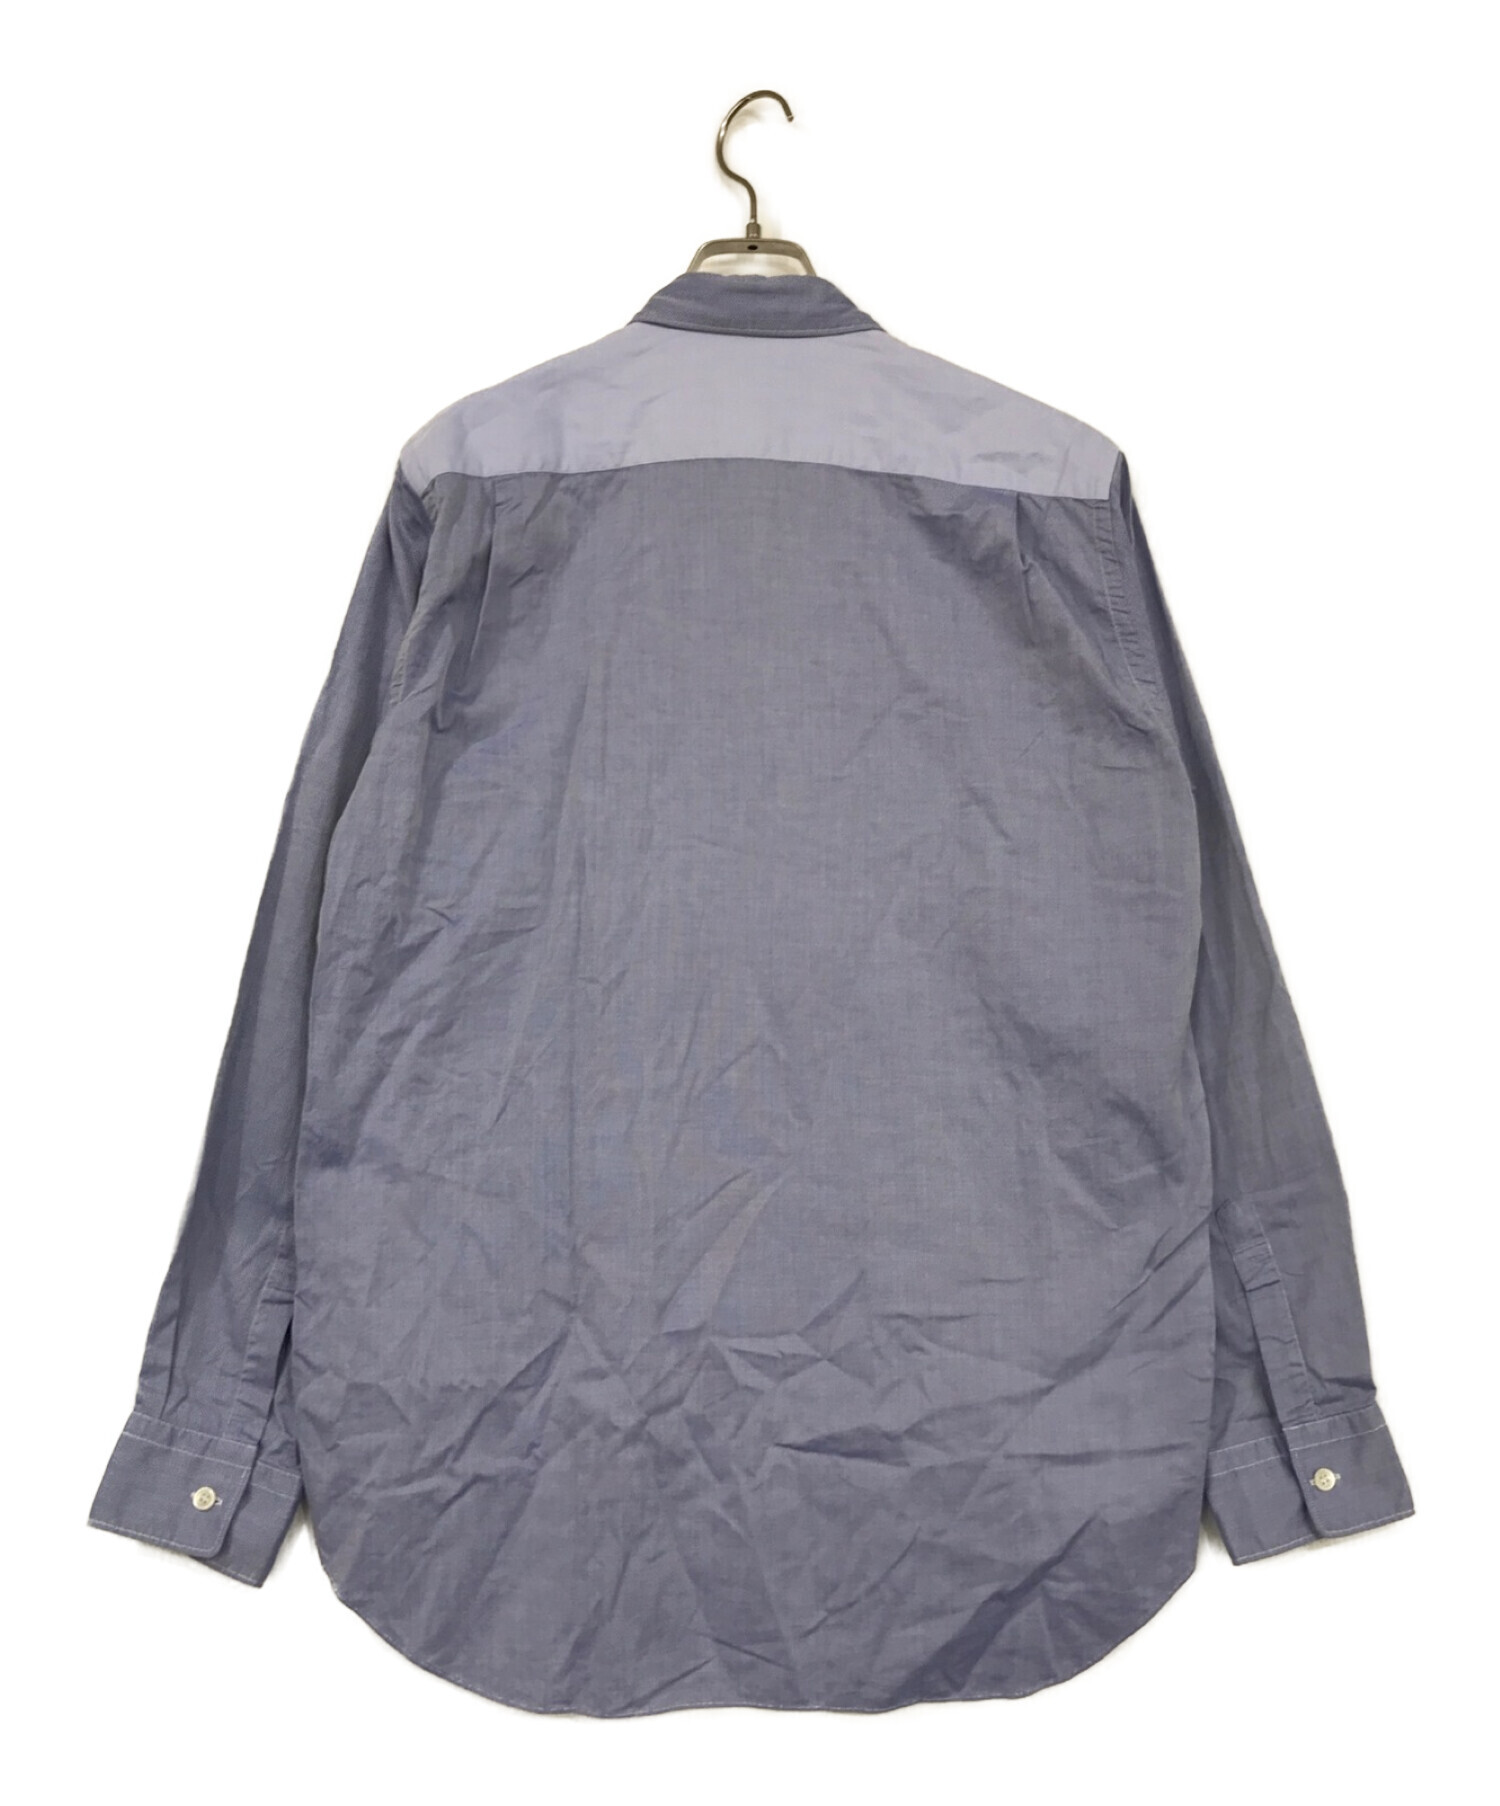 COMME des GARCONS HOMME (コムデギャルソン オム) アーガイルステッチシャツ ブルー サイズ:SIZE SS